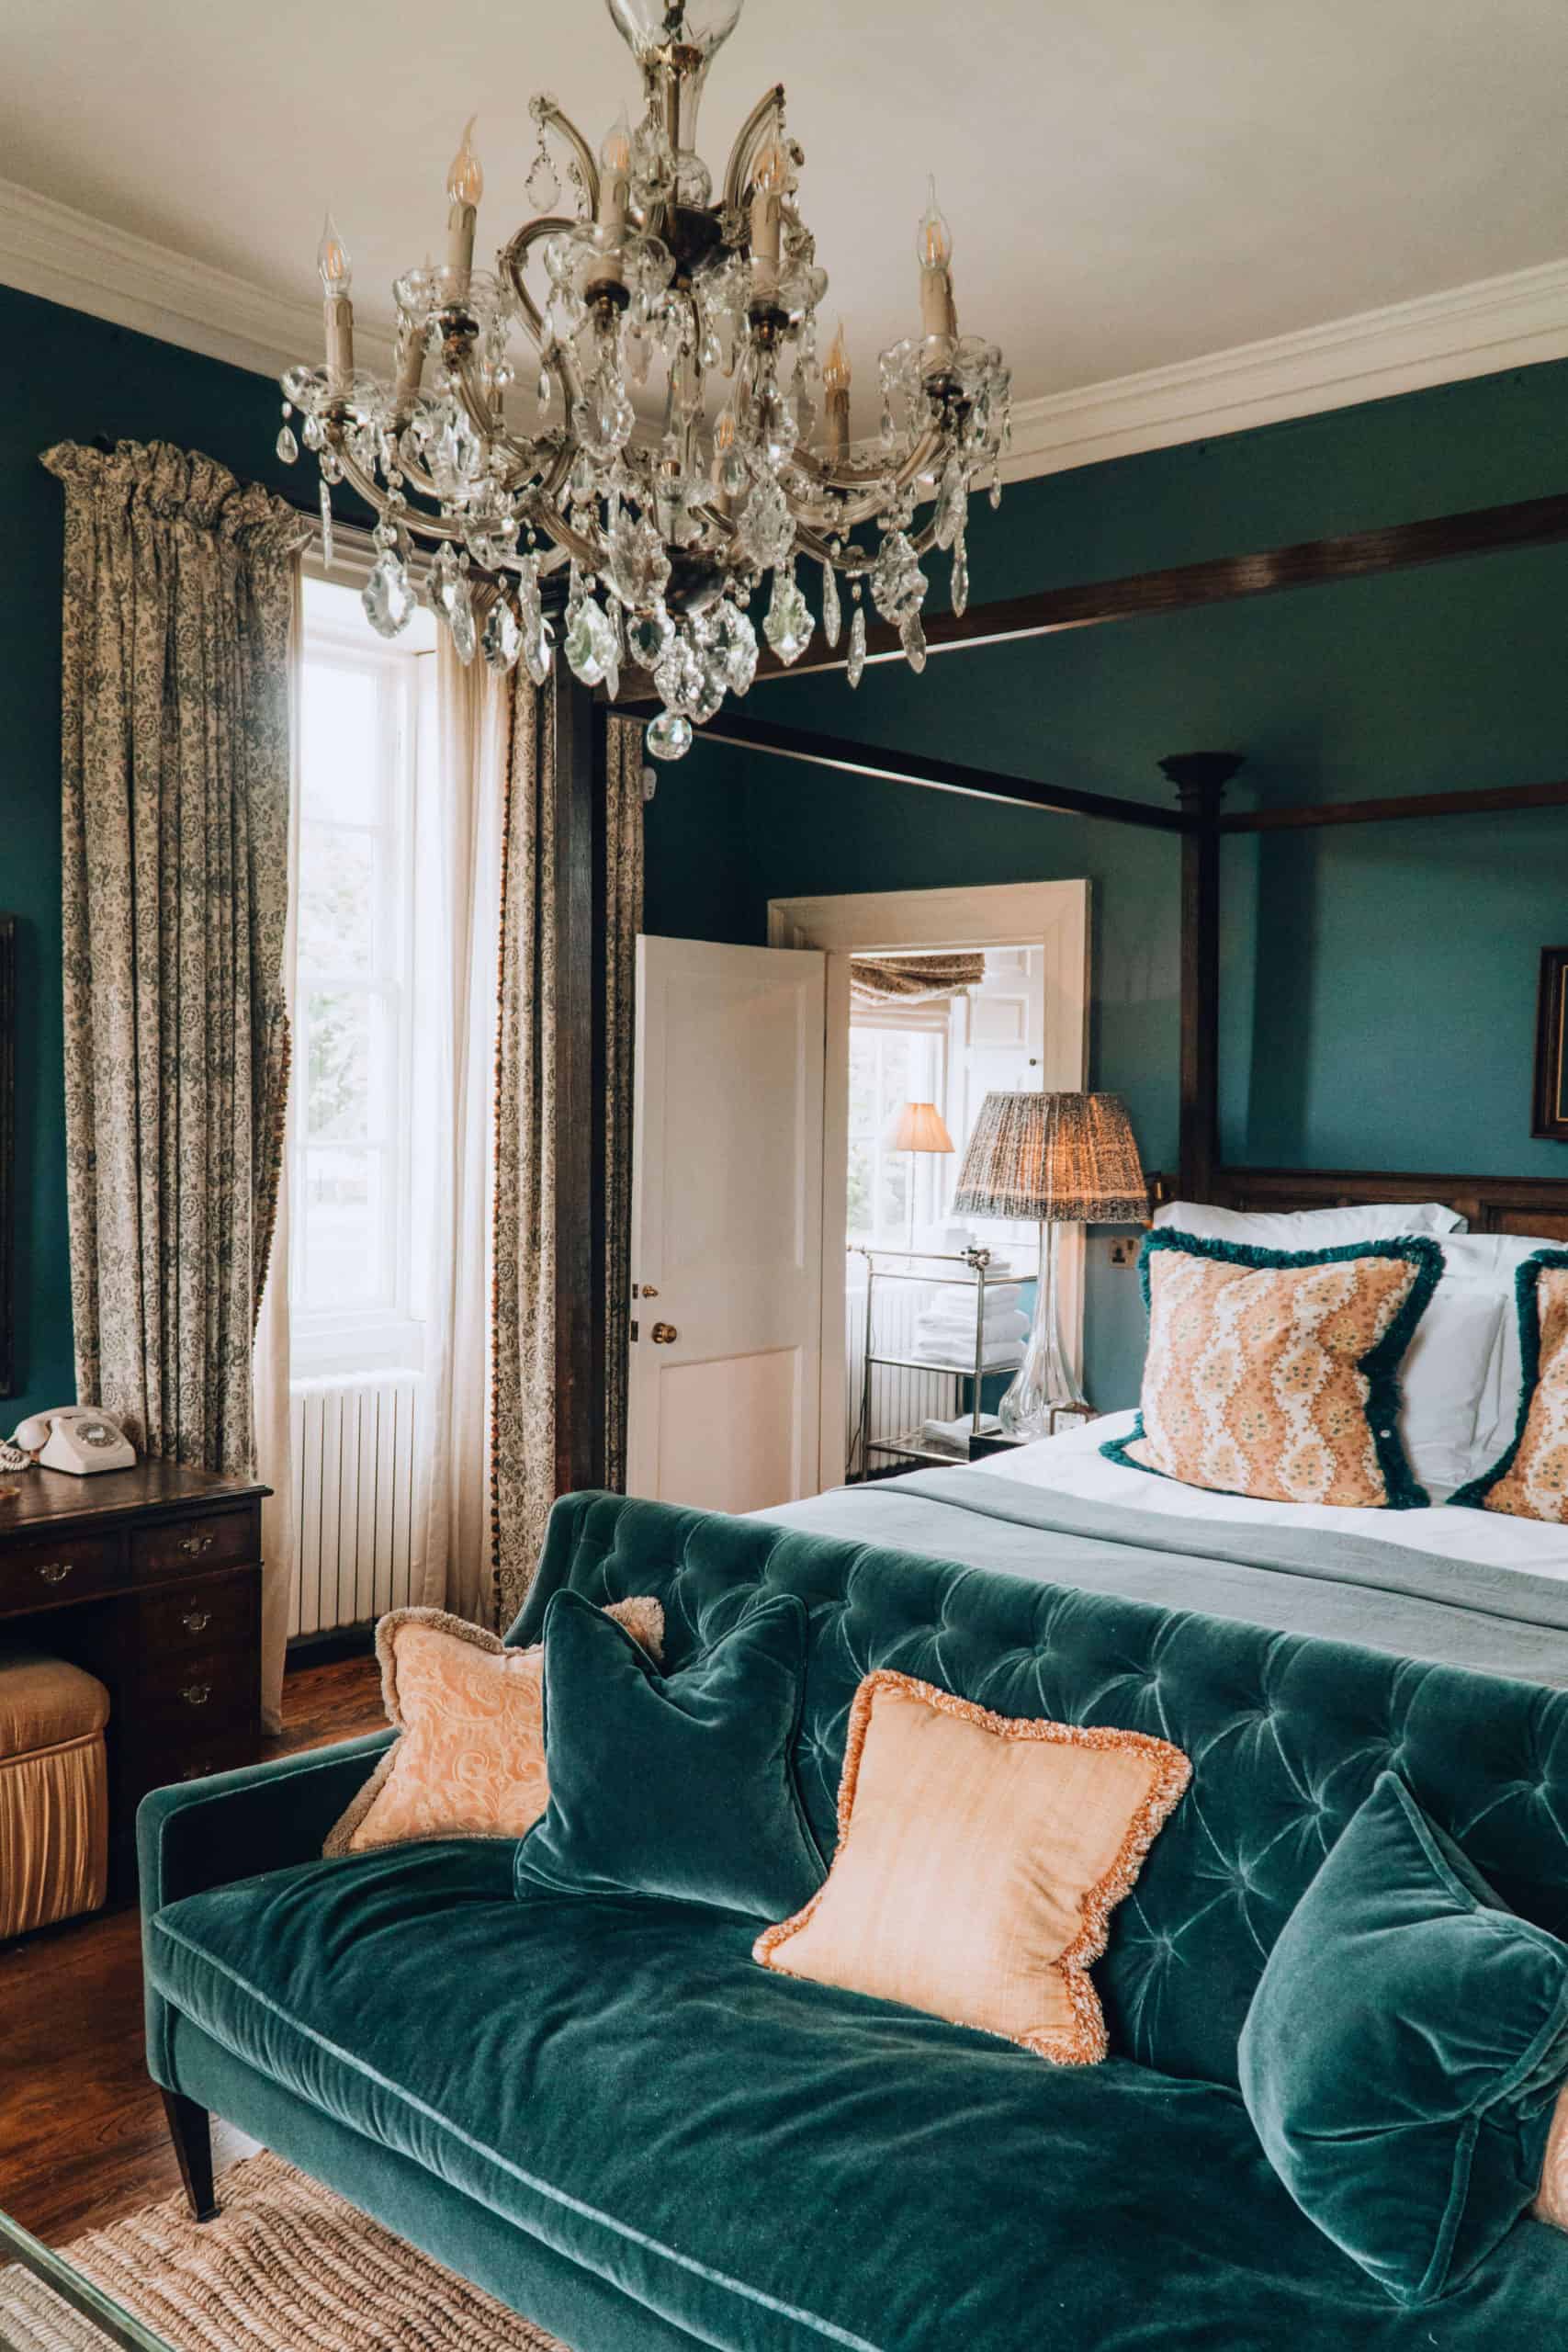 Cozy bedroom at Babington House in the English Countryside | The Cotswolds in 20 Photos